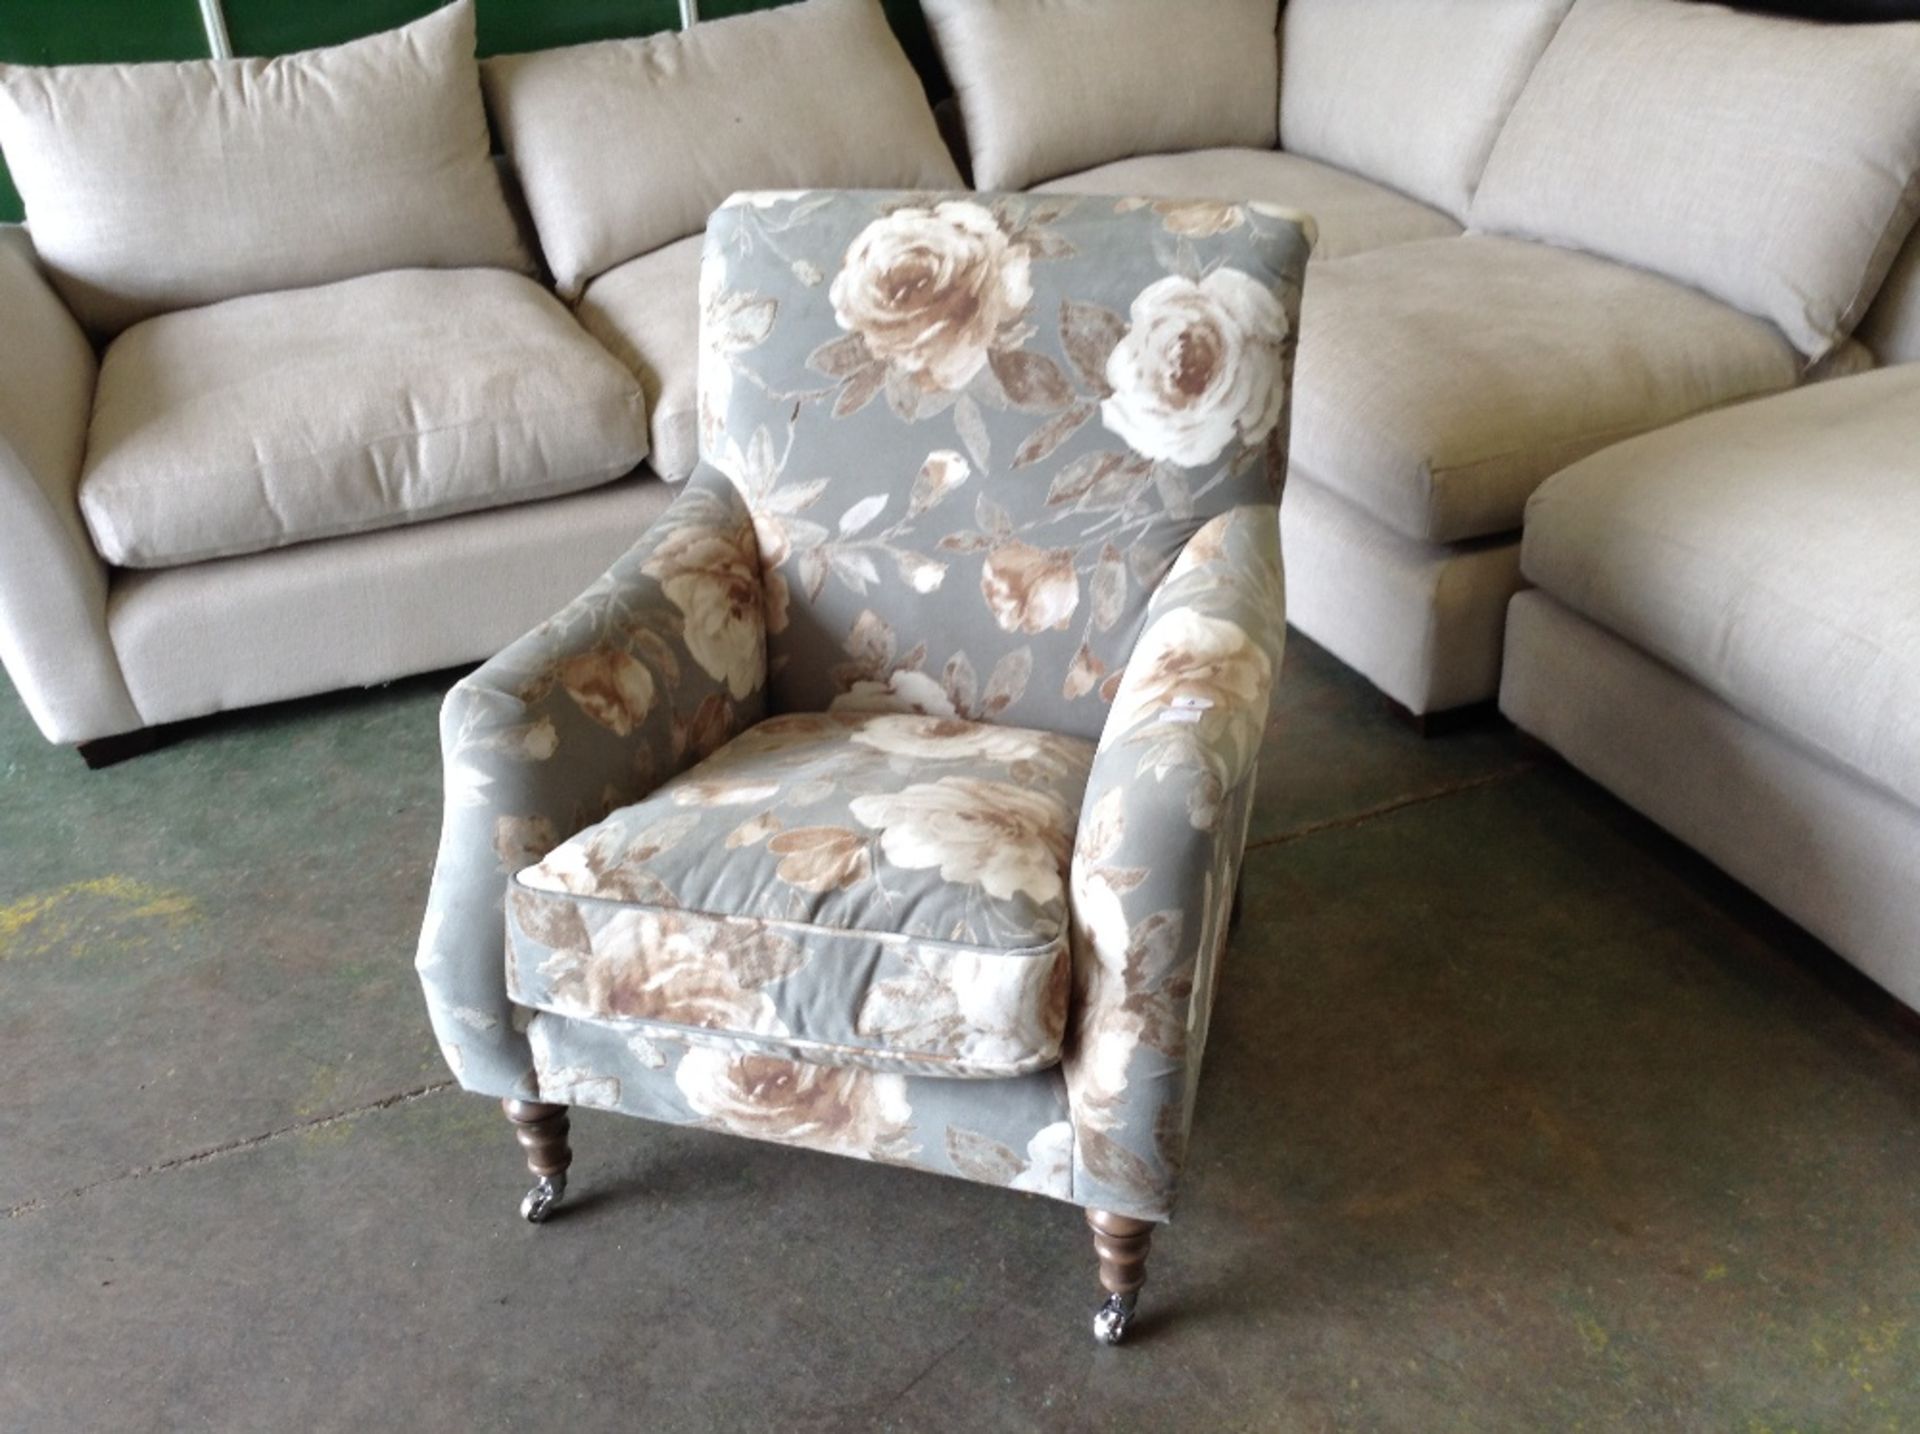 GREEN FLORAL PATTERNED WING CHAIR (TR000932 WO0266